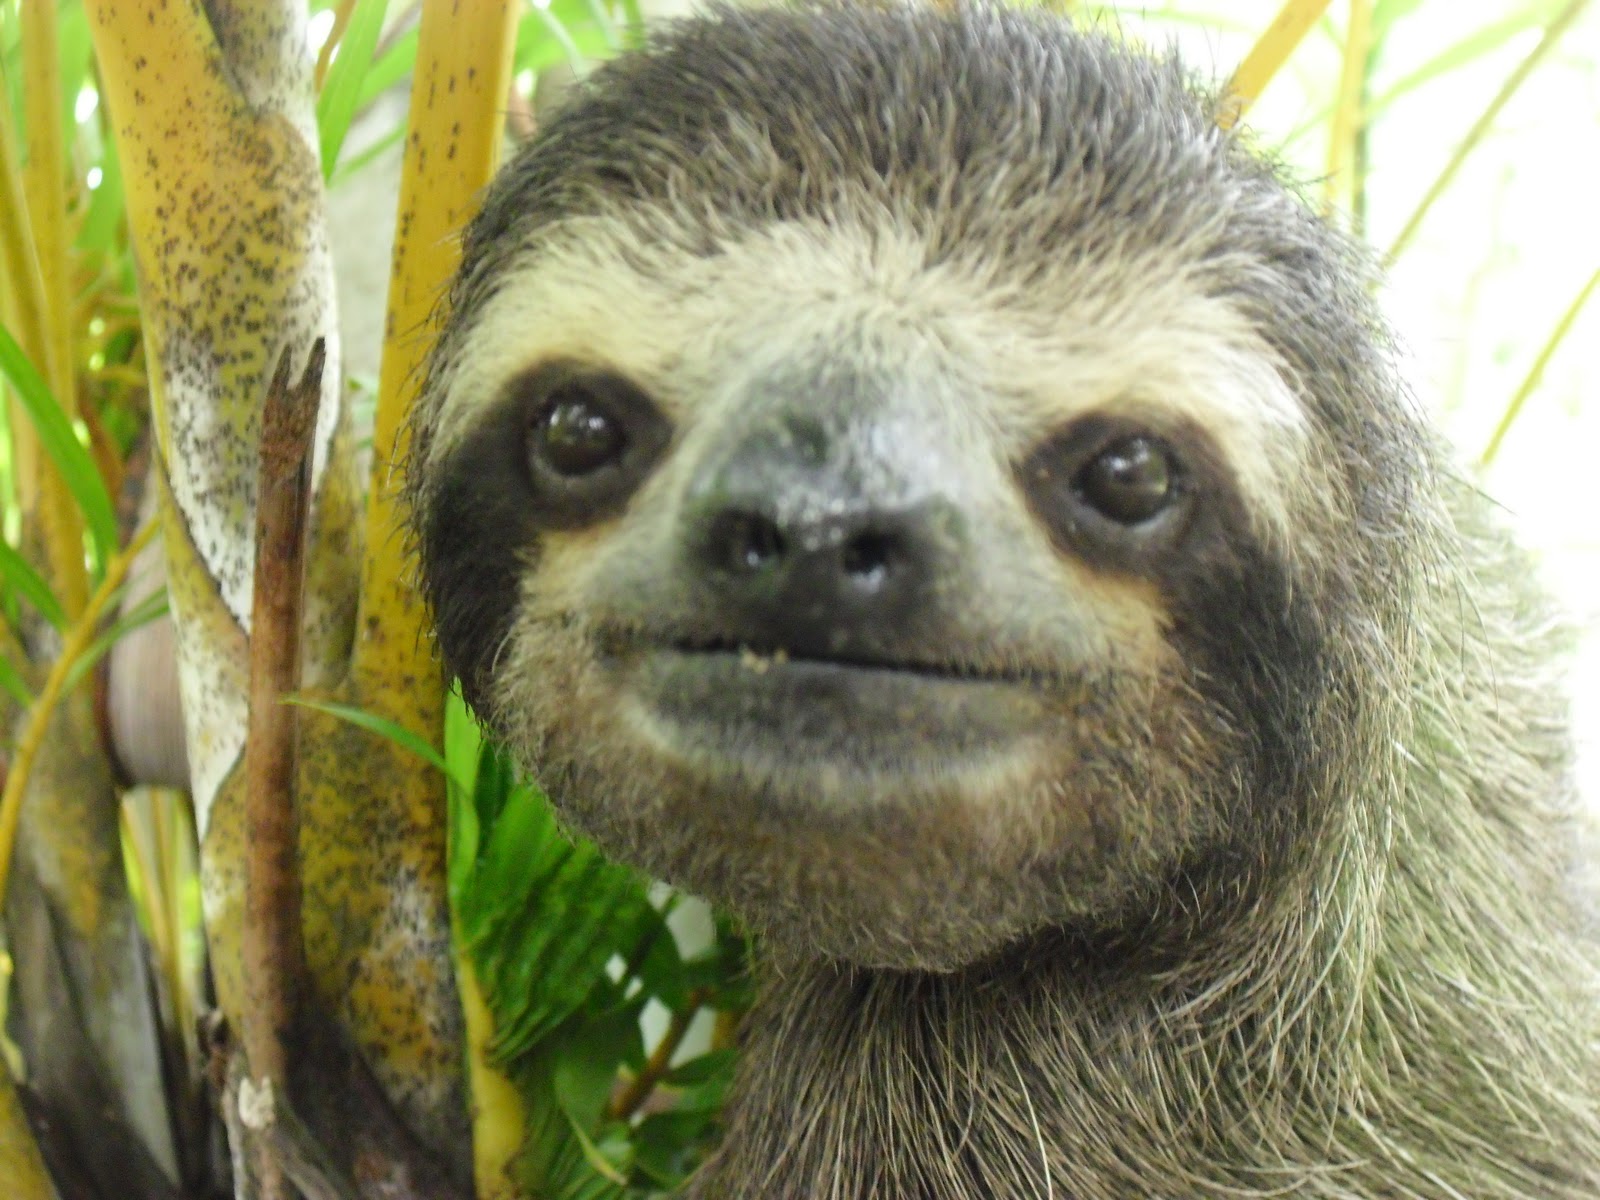 Funny Sloth Face Adolescent Hanging Out